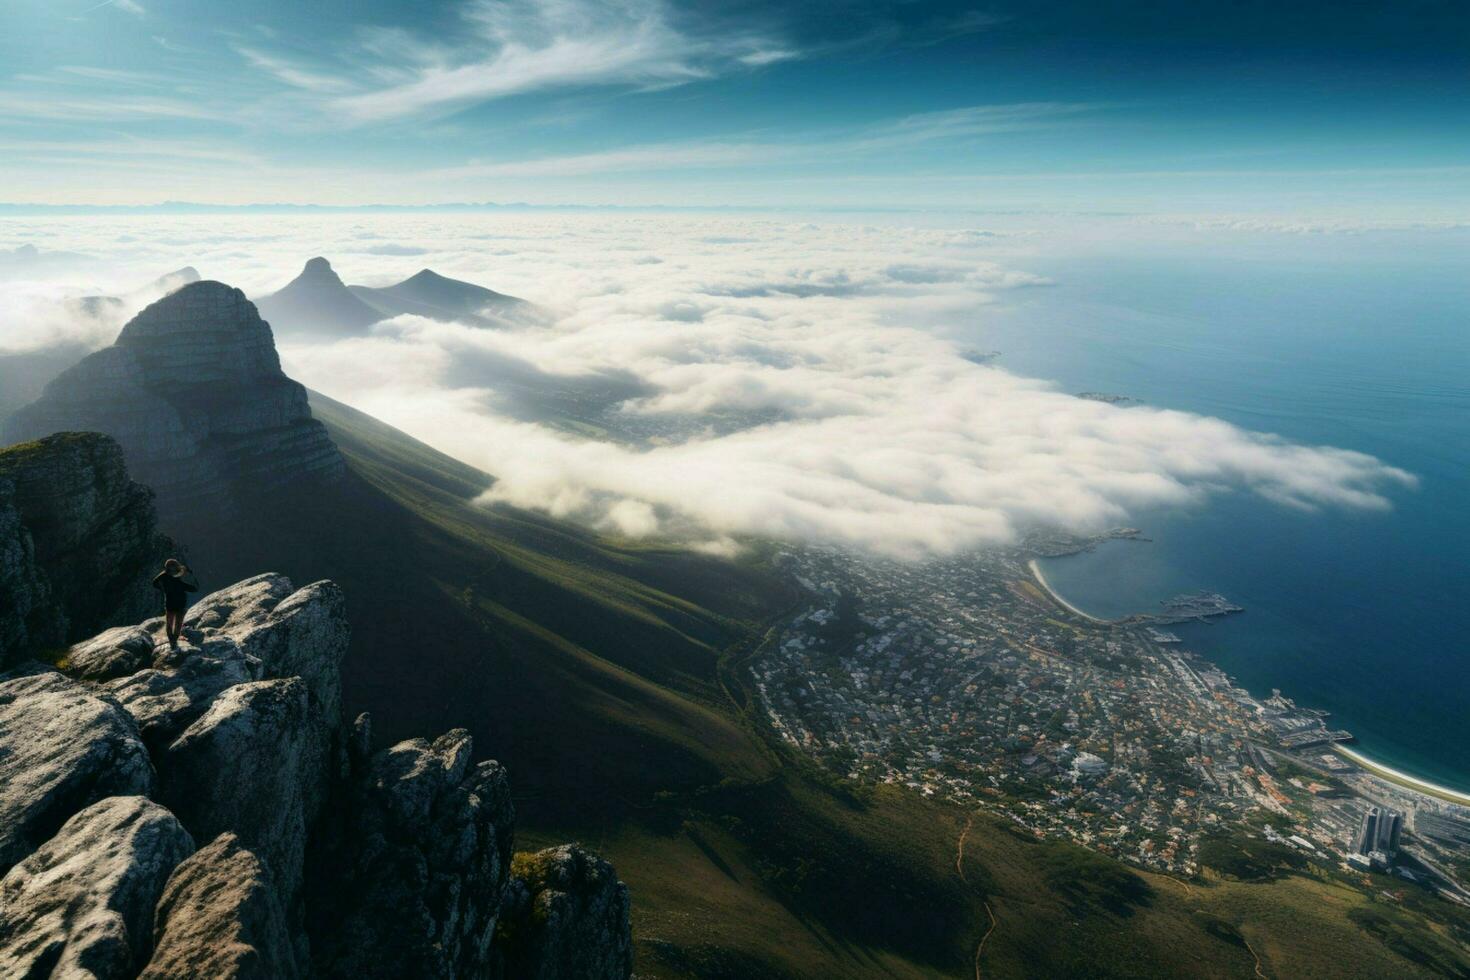 The breathtaking view from atop Table Mountain photo